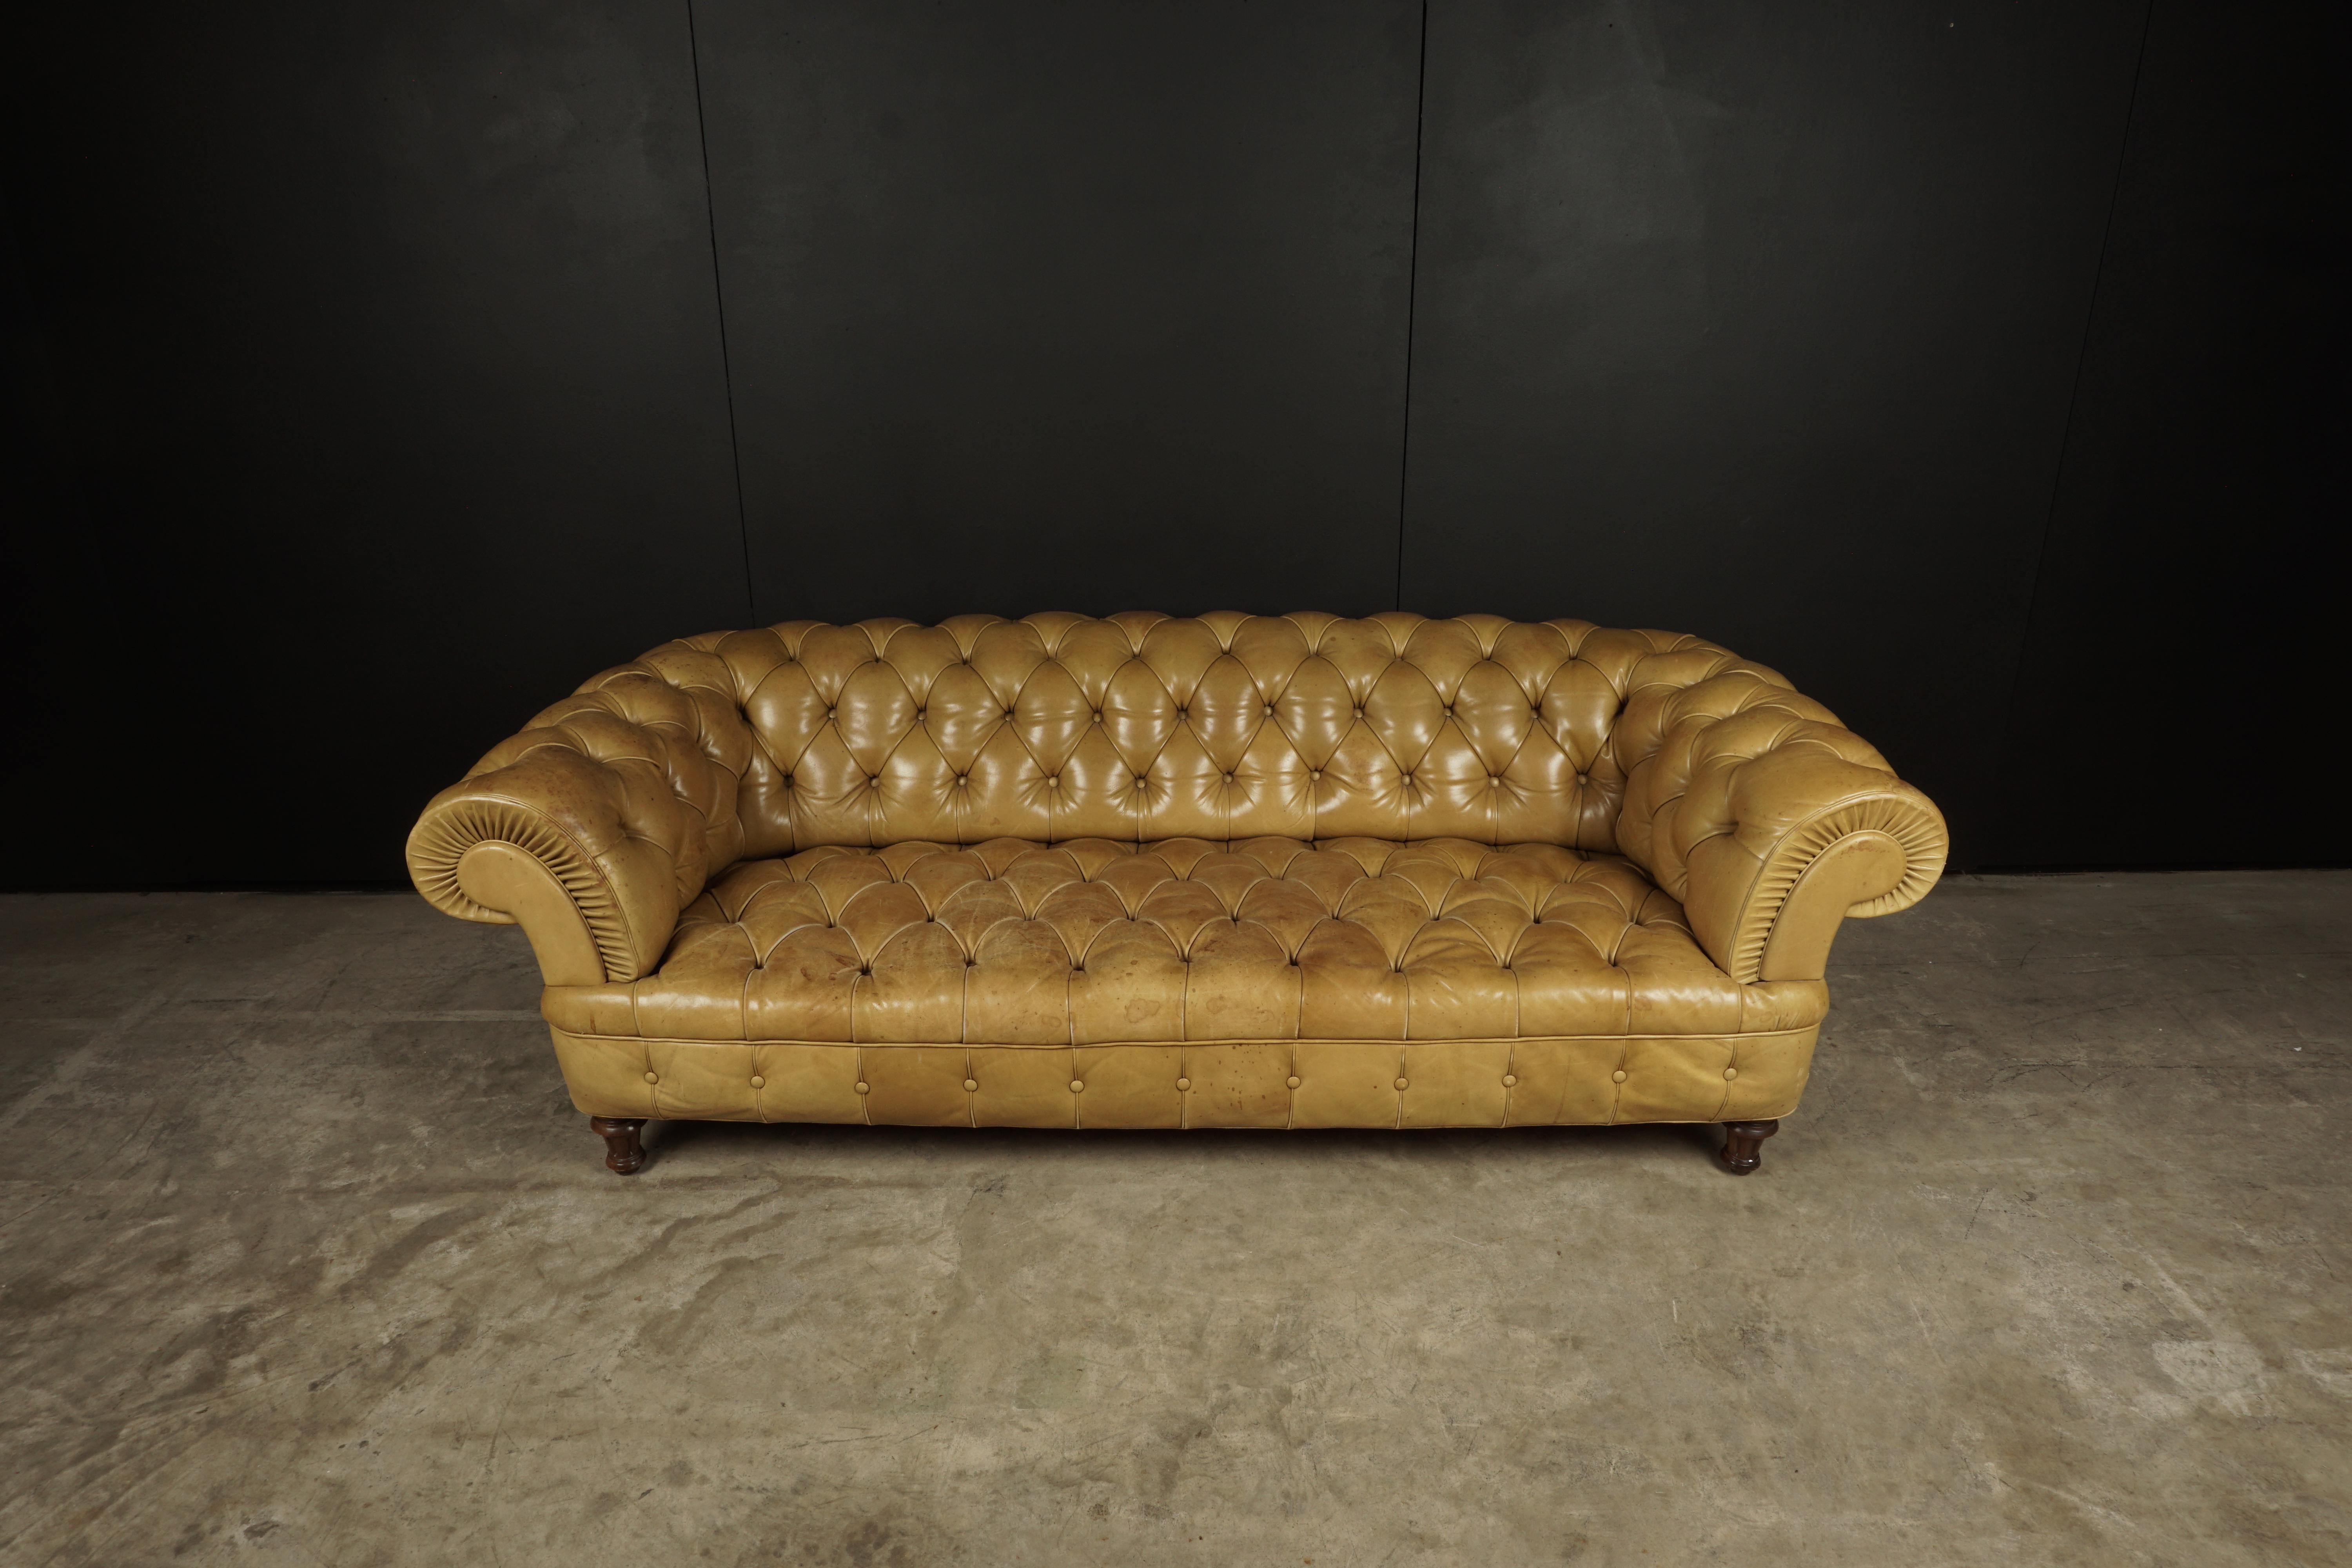 Vintage Poltrona Frau Chesterfield sofa, Italy, 1980s. Original cognac leather upholstery with fantastic wear and patina. Manufacturers mark on side.